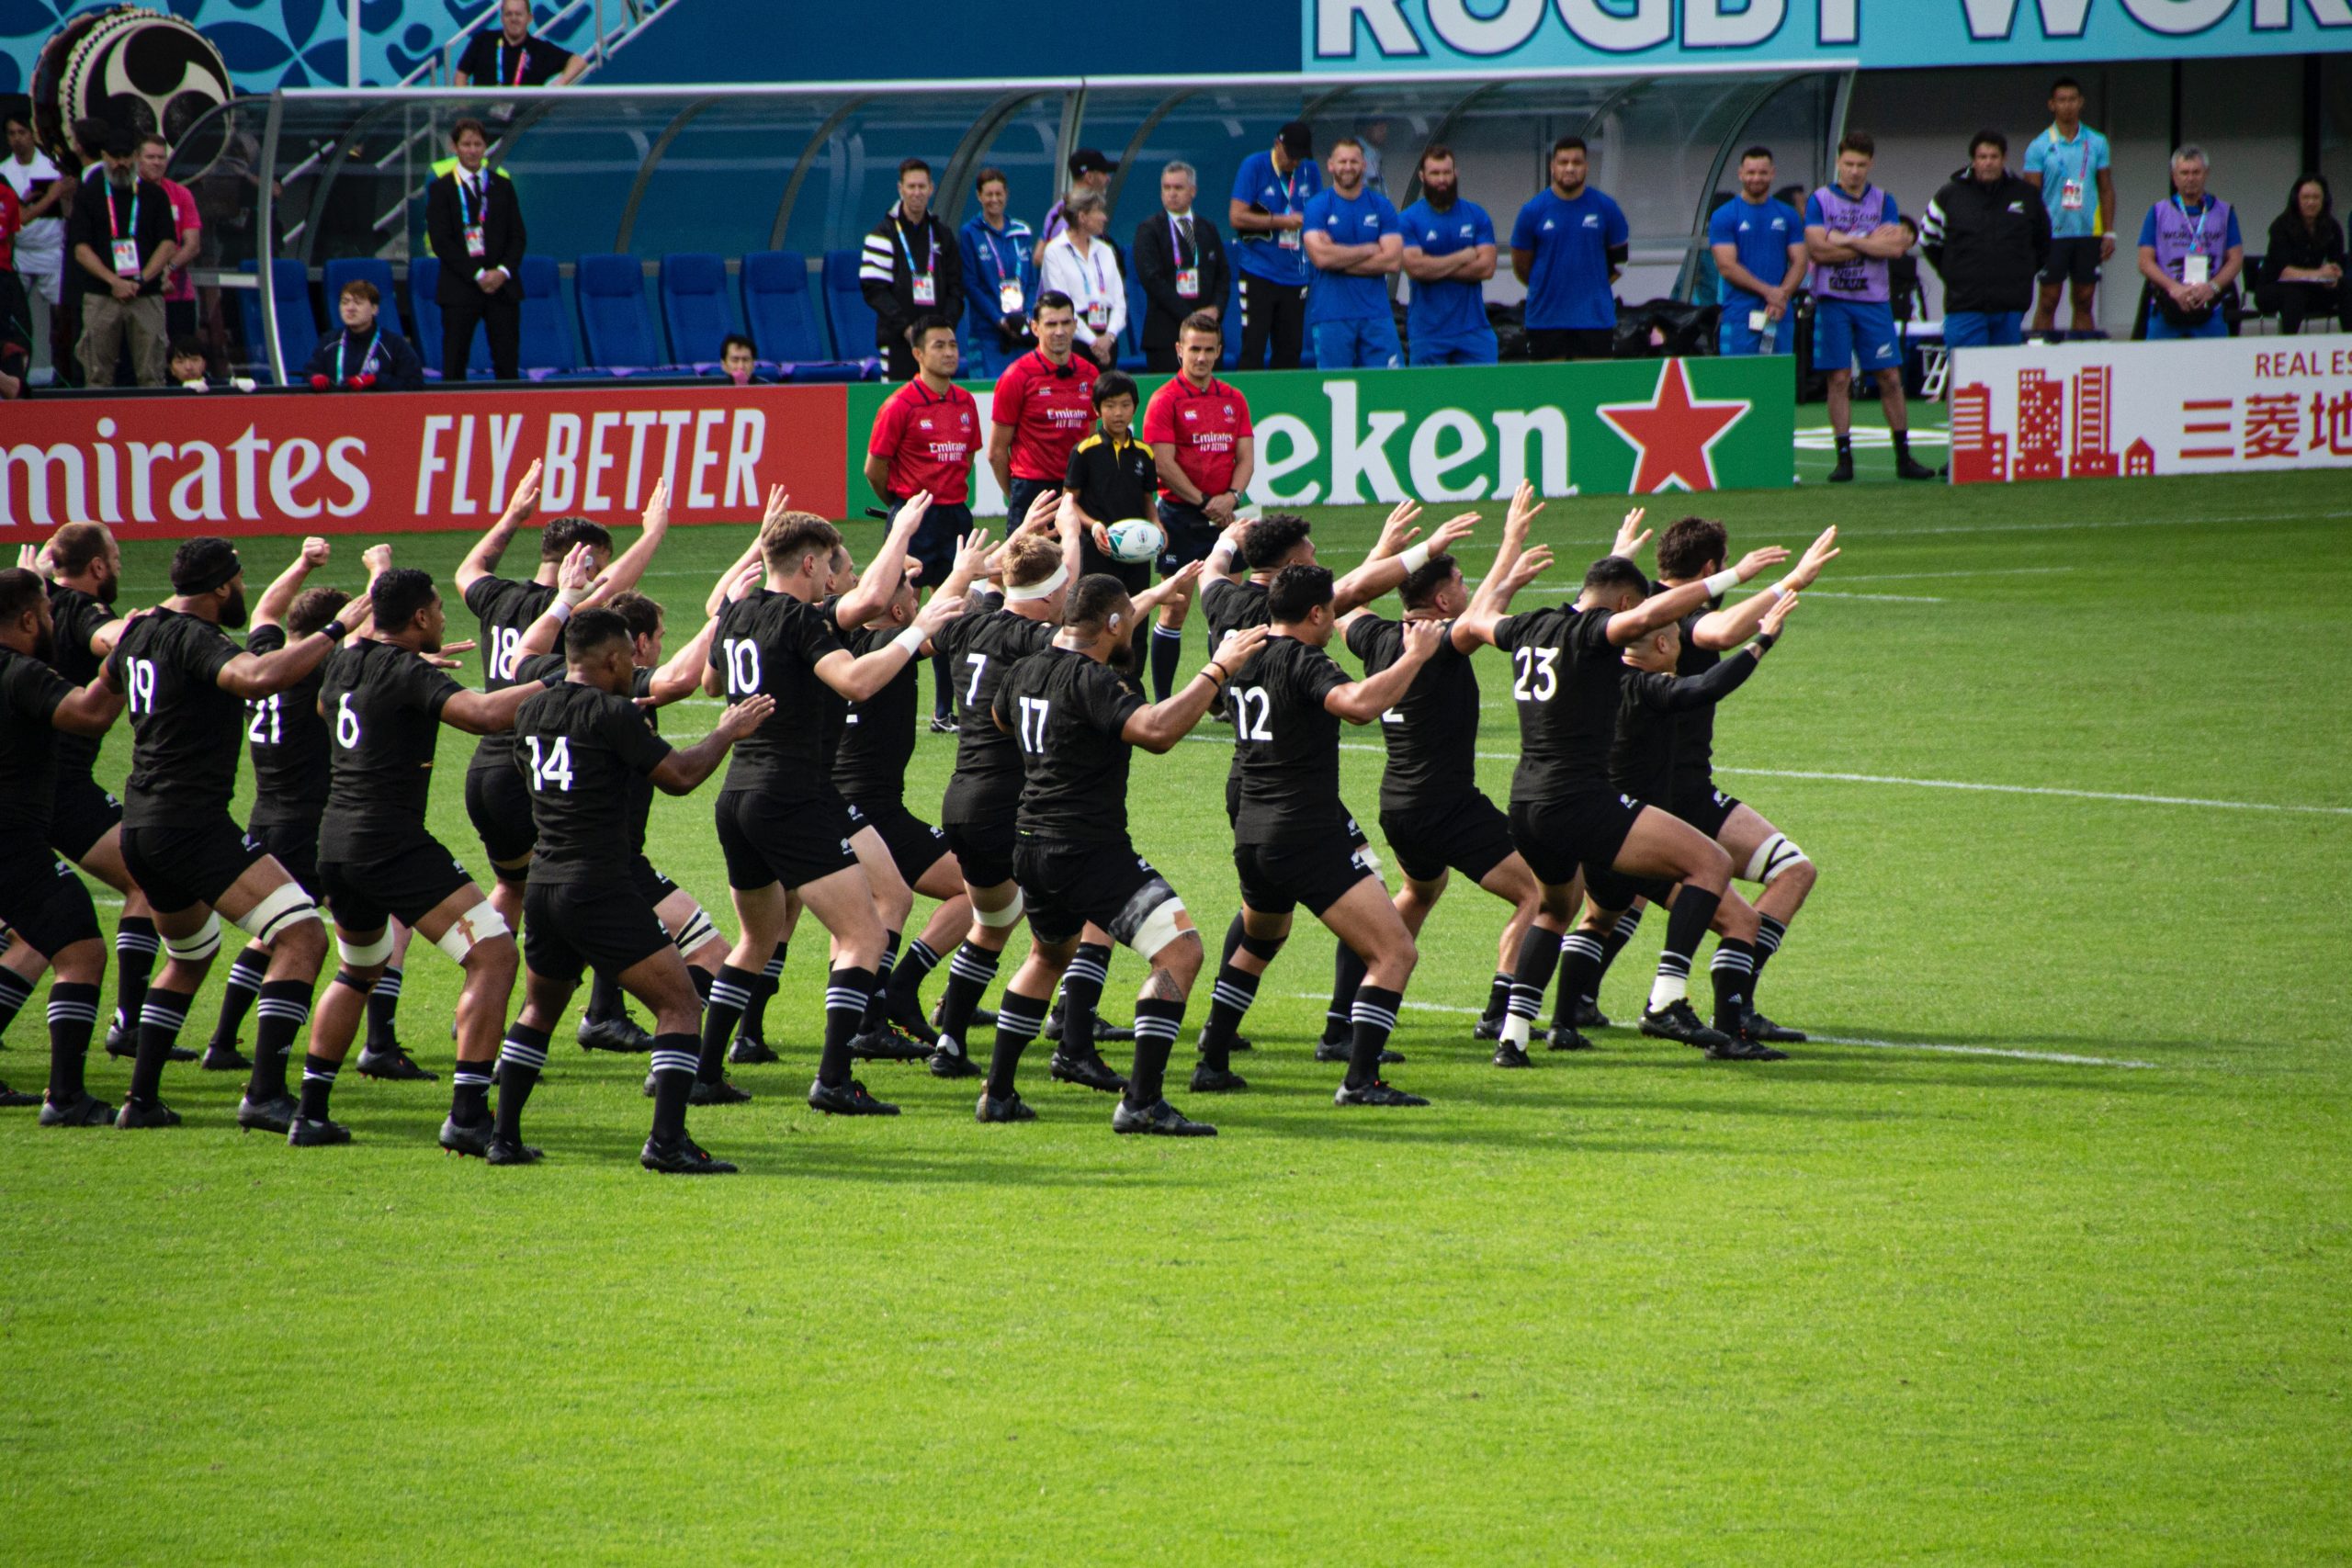 The New Zealand All Blacks performing the Haka with rugby match officials watching on